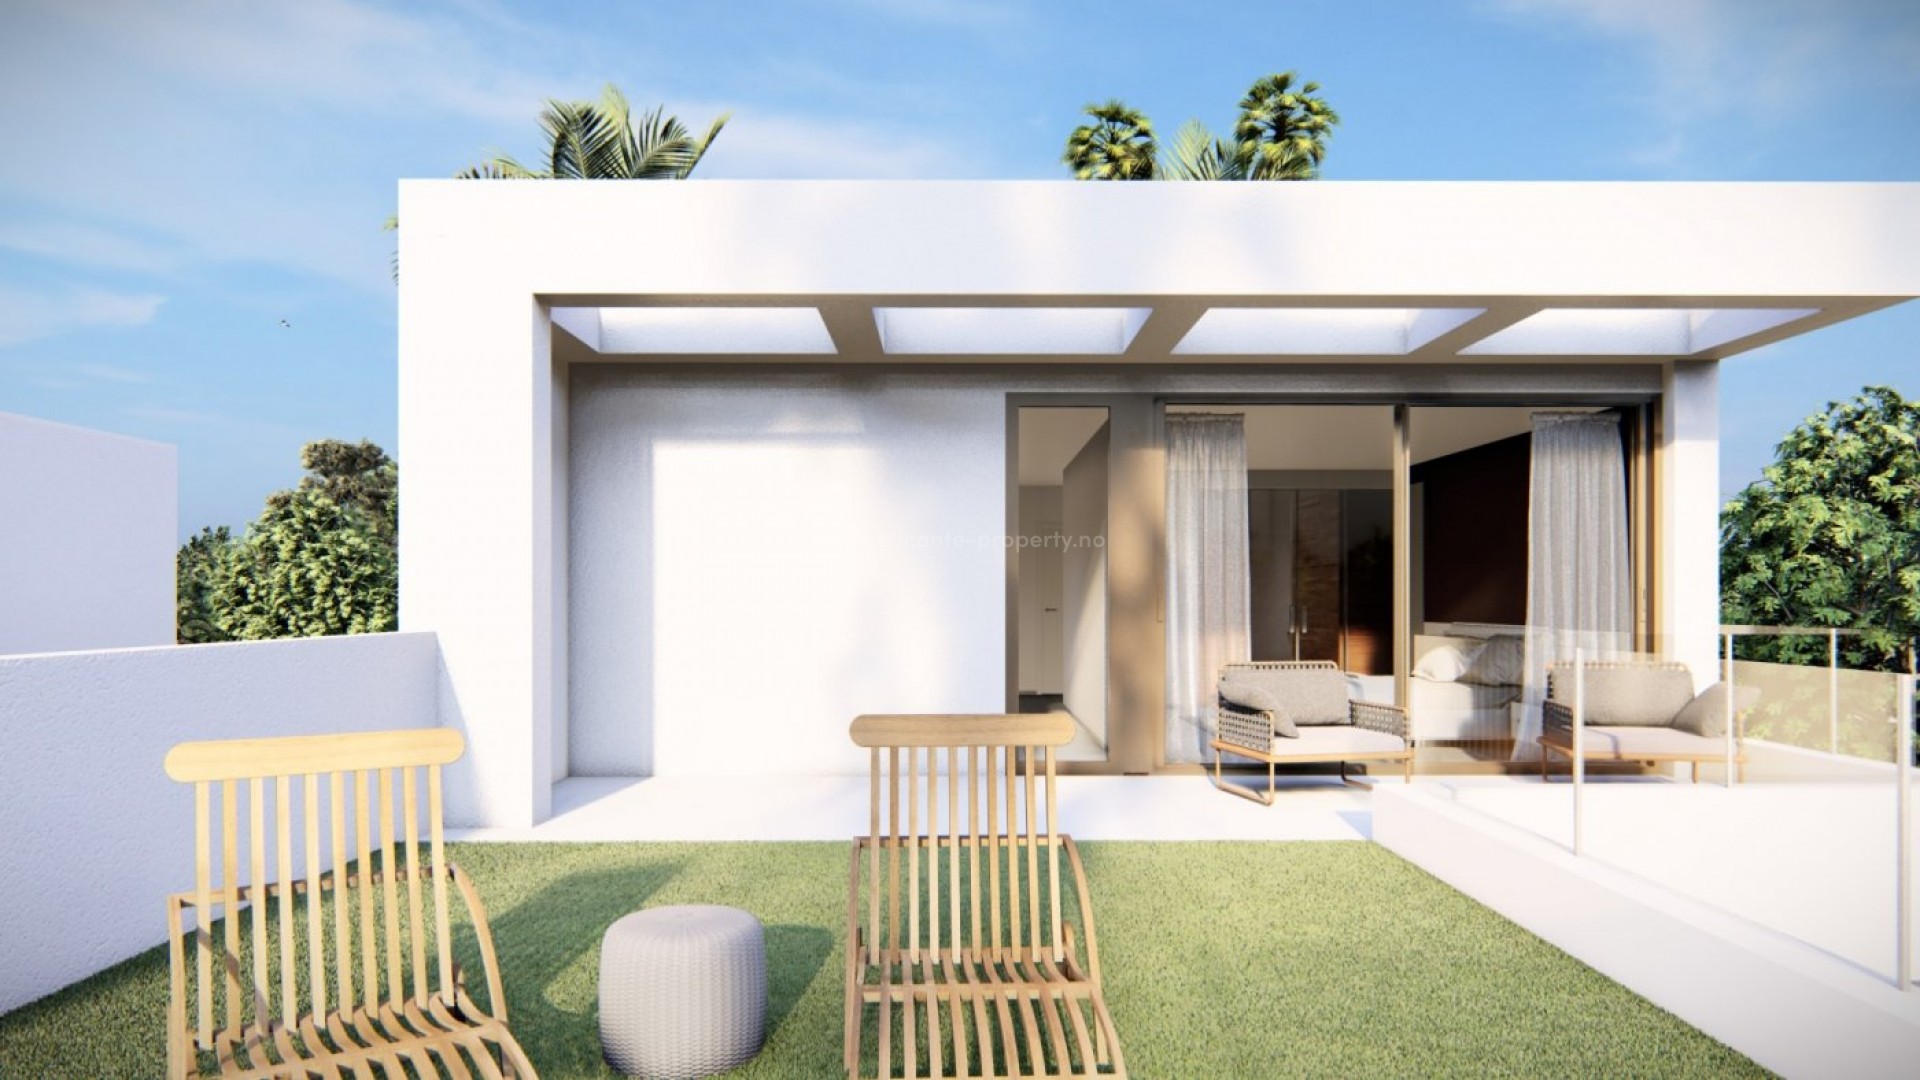 New built house/villa in La Zenia, Orihuela Costa, luxury villa within walking distance to the beach with 3 bedrooms, 2 bathrooms, open plan kitchen with spacious living room, terrace